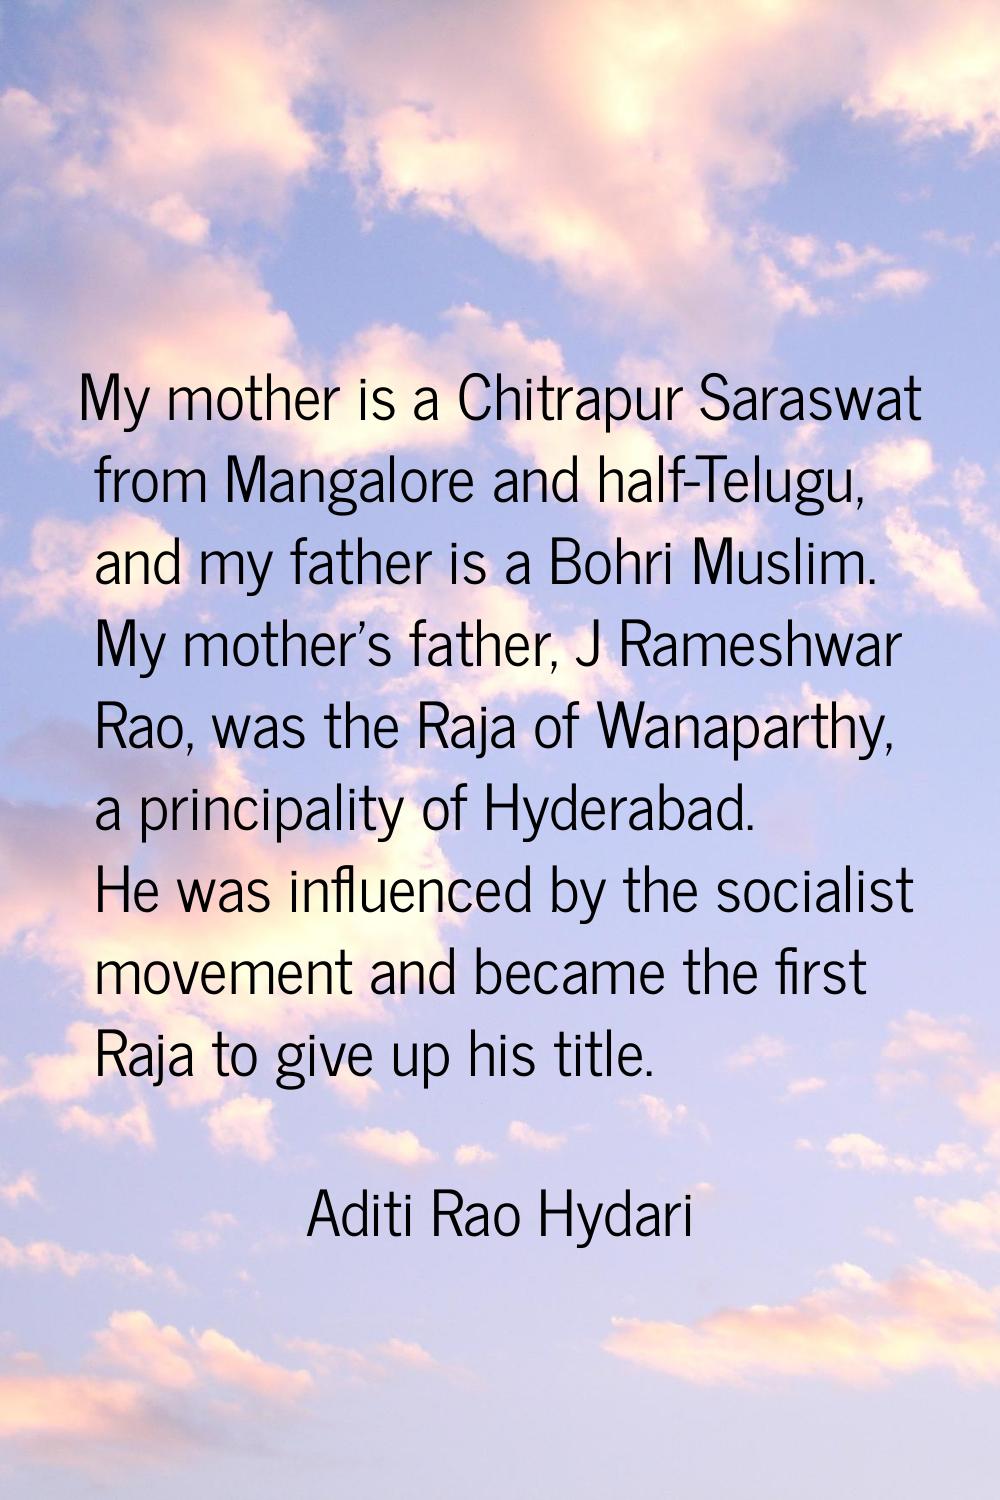 My mother is a Chitrapur Saraswat from Mangalore and half-Telugu, and my father is a Bohri Muslim. 